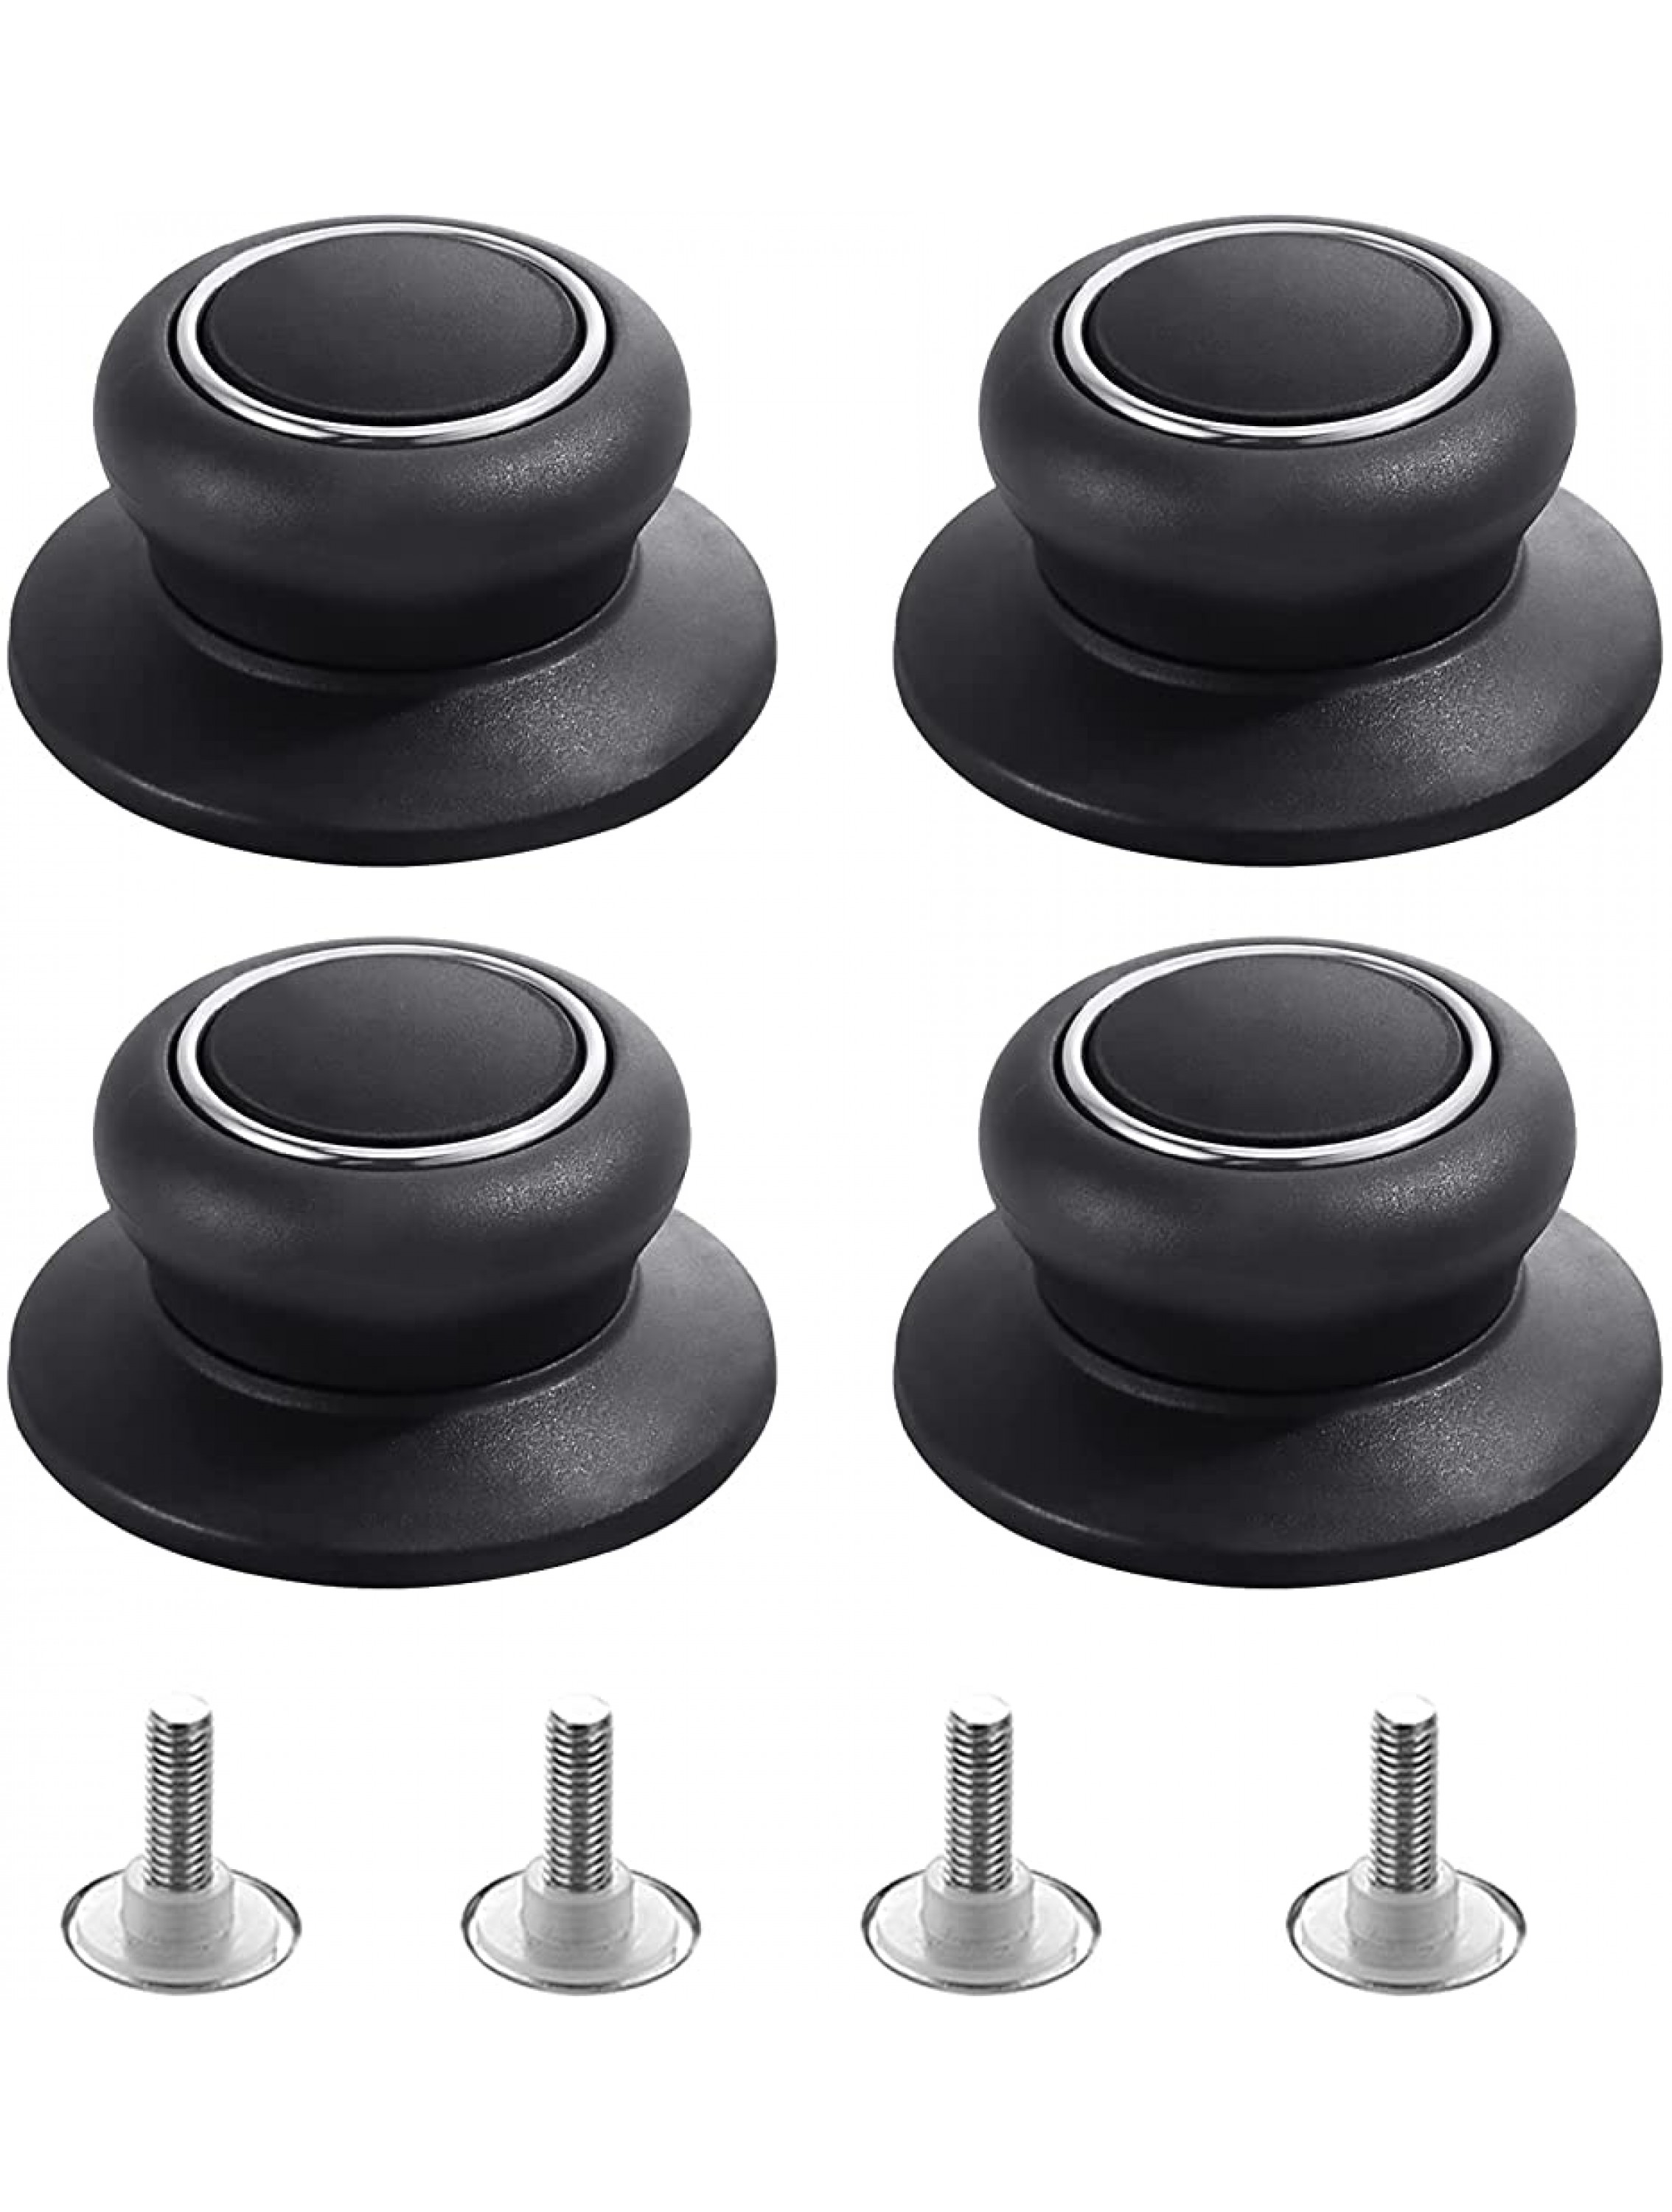 4Pcs Universal Pot Lid Top Replacement Knob,Heat Resistant and Prevent static electricity,Easy installation Kitchen Cookware Replacement Pan Lid Holding Handles. Black - BVBGW20EI